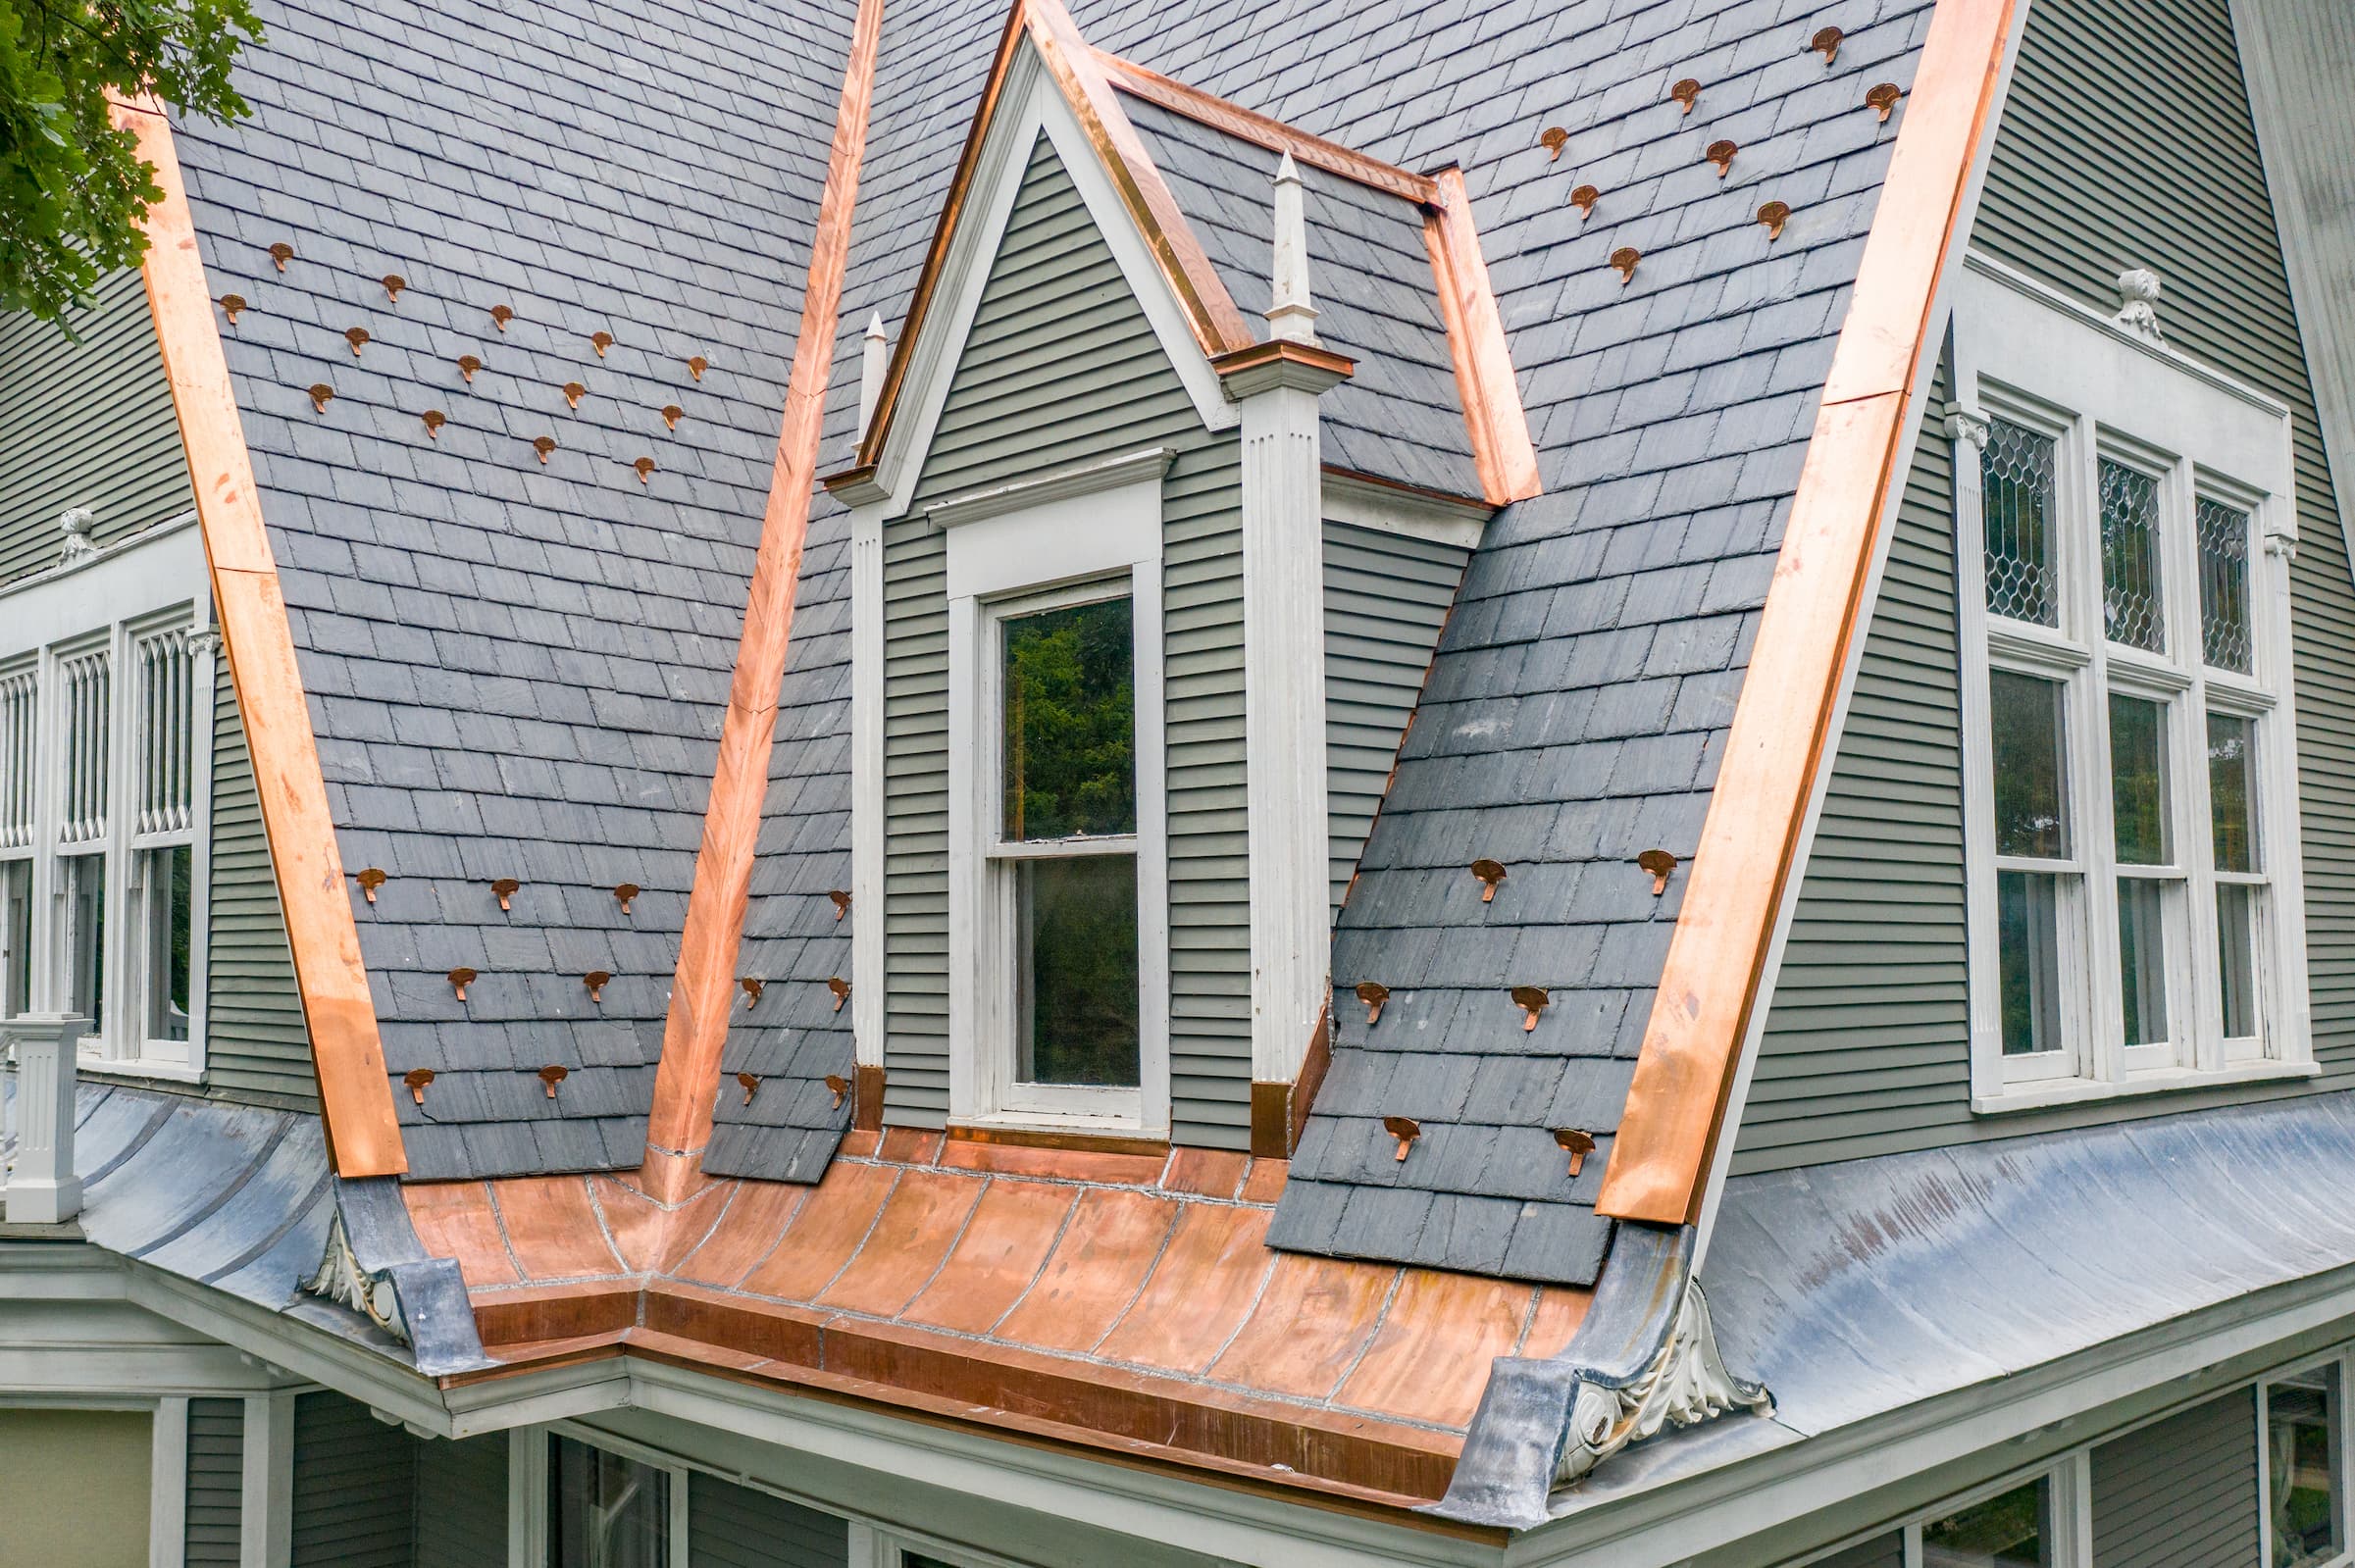 Working with Copper Roofing is a Craft